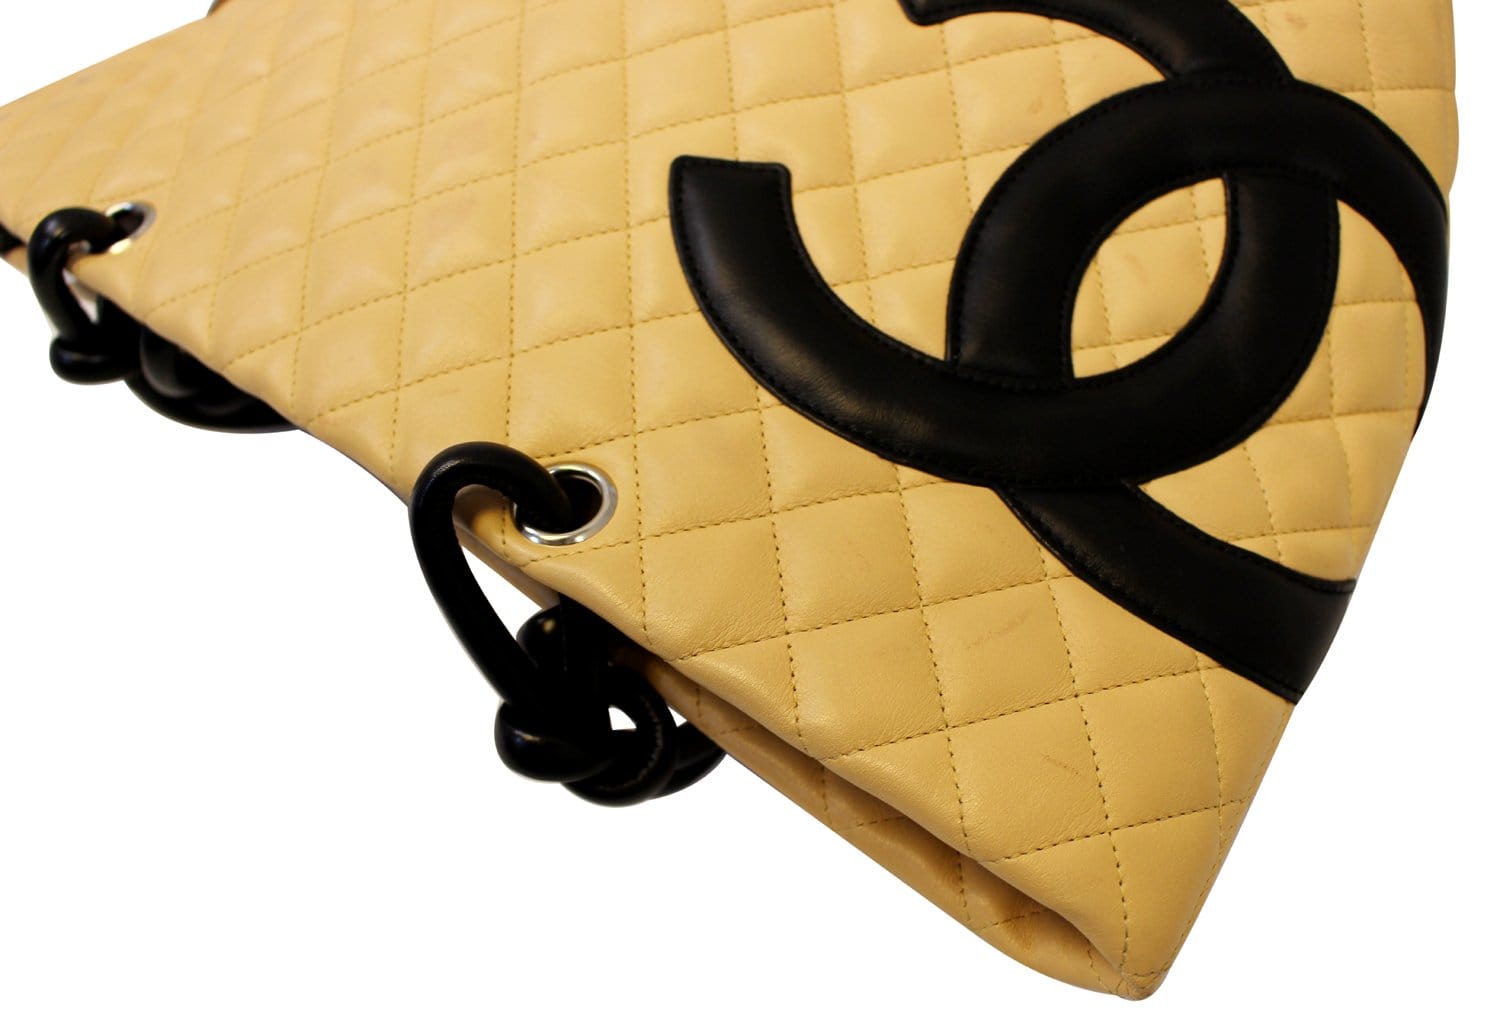 CHANEL Beige Quilted Leather Ligne Cambon Large Tote Bag E4088